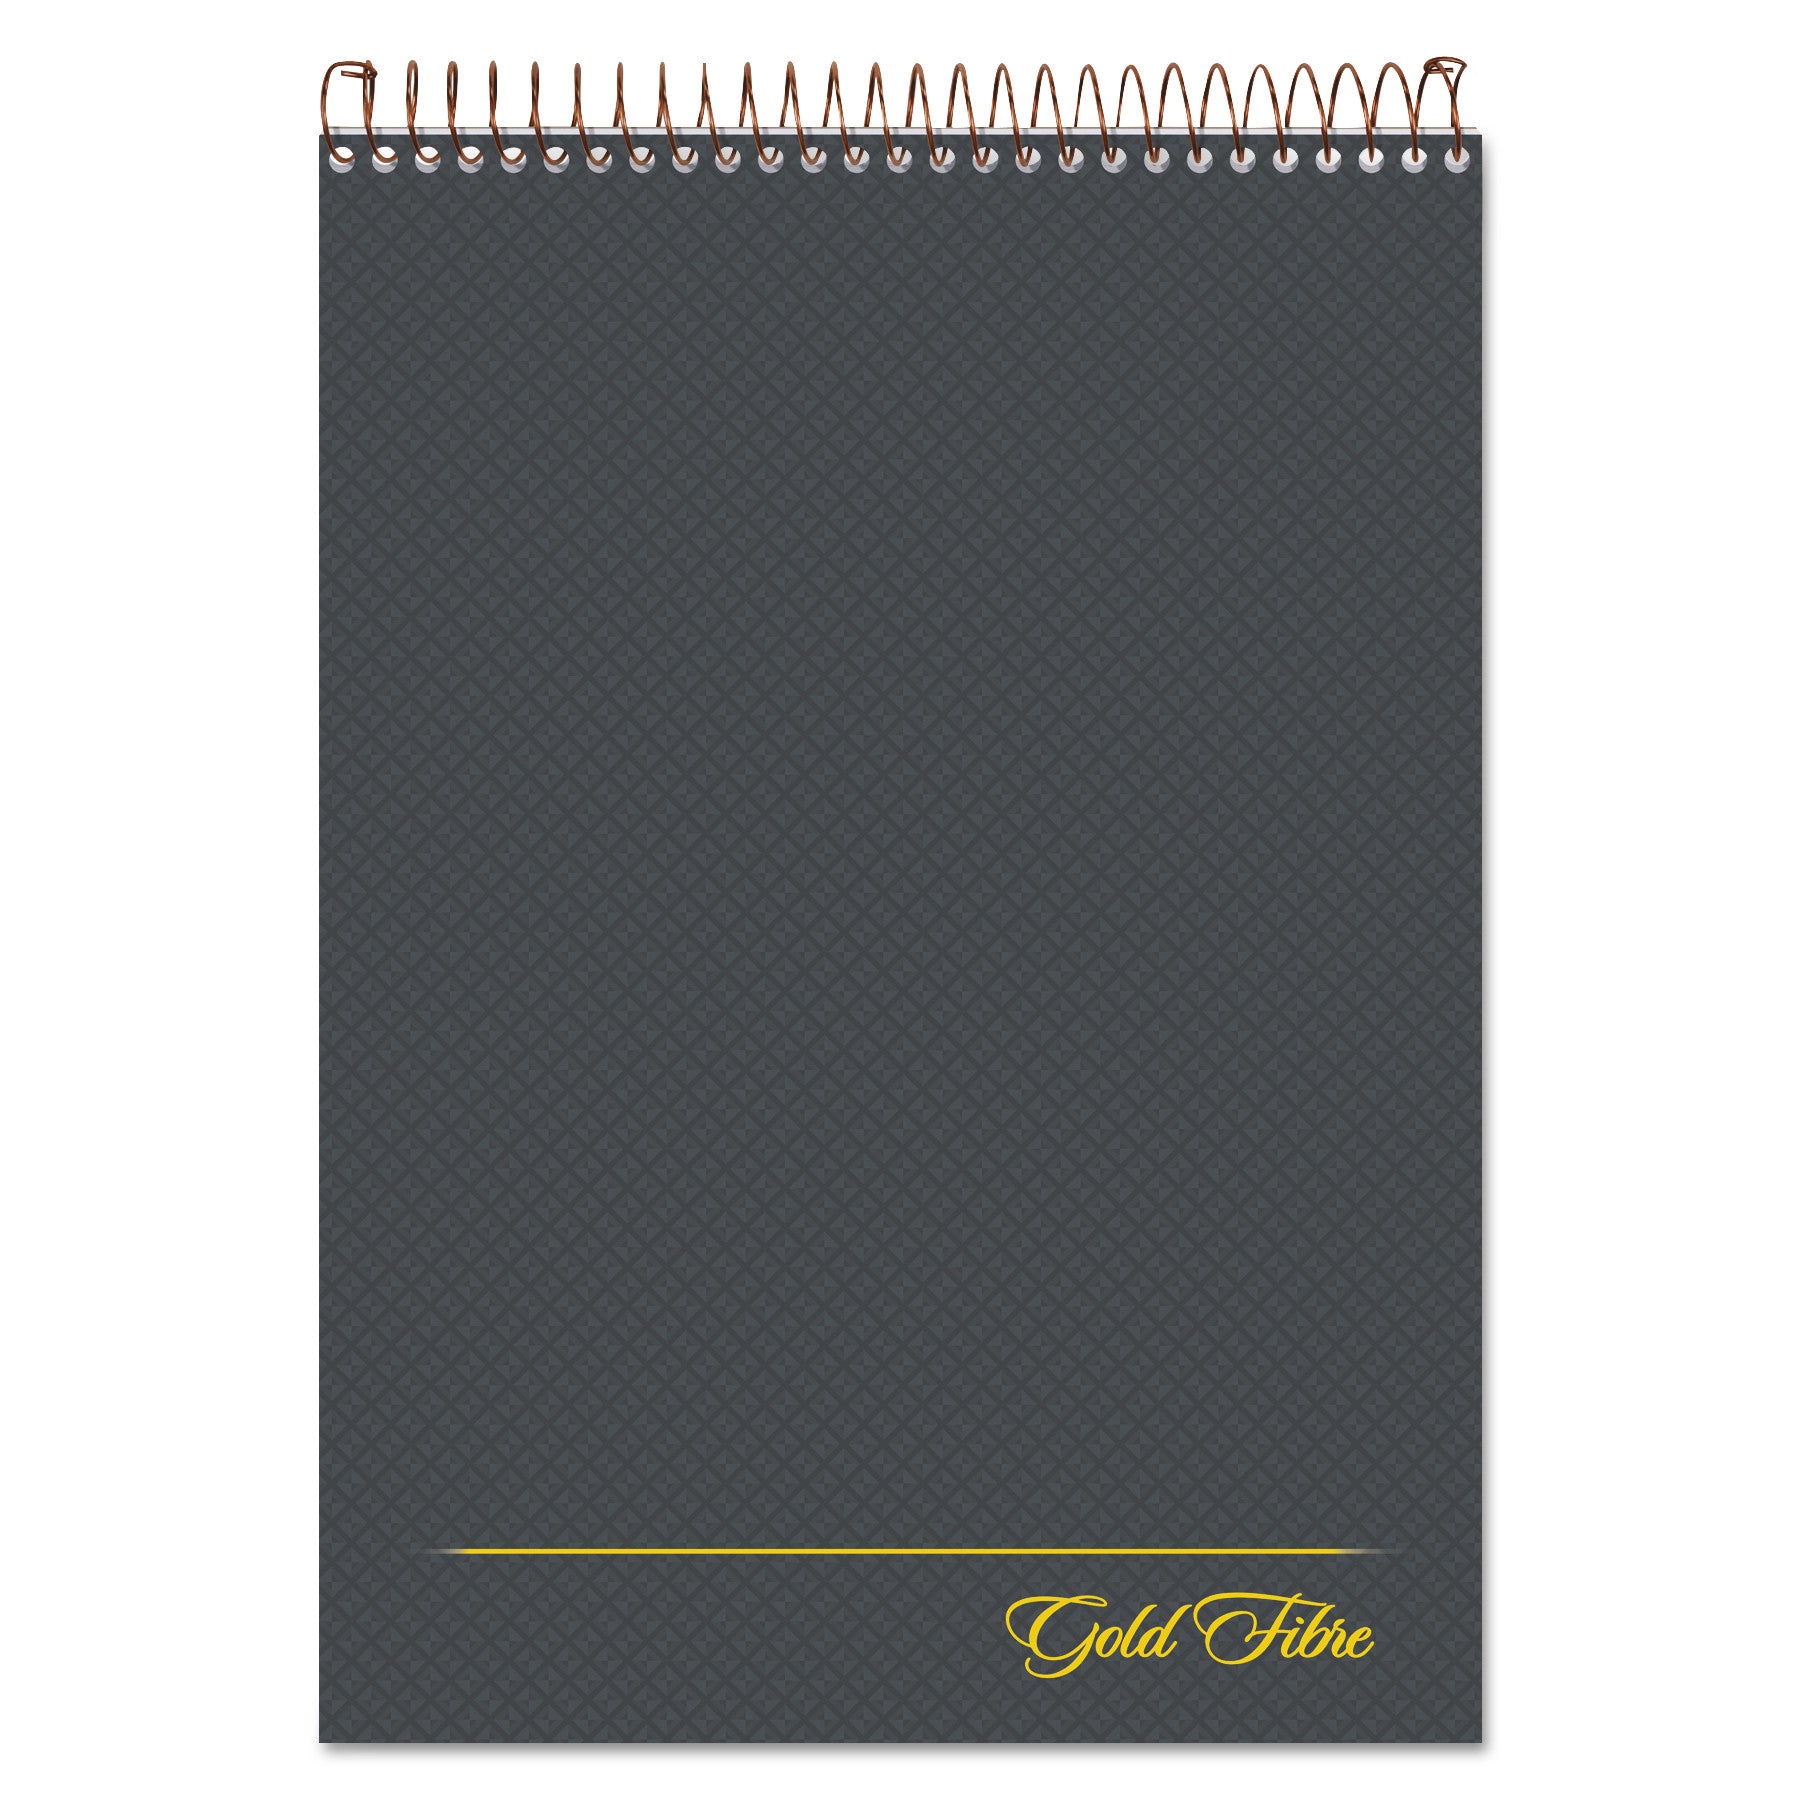 Gold Fibre Wirebound Project Notes Pad, Project-Management Format, Gray Cover, 70 White 8.5 x 11.75 Sheets - 